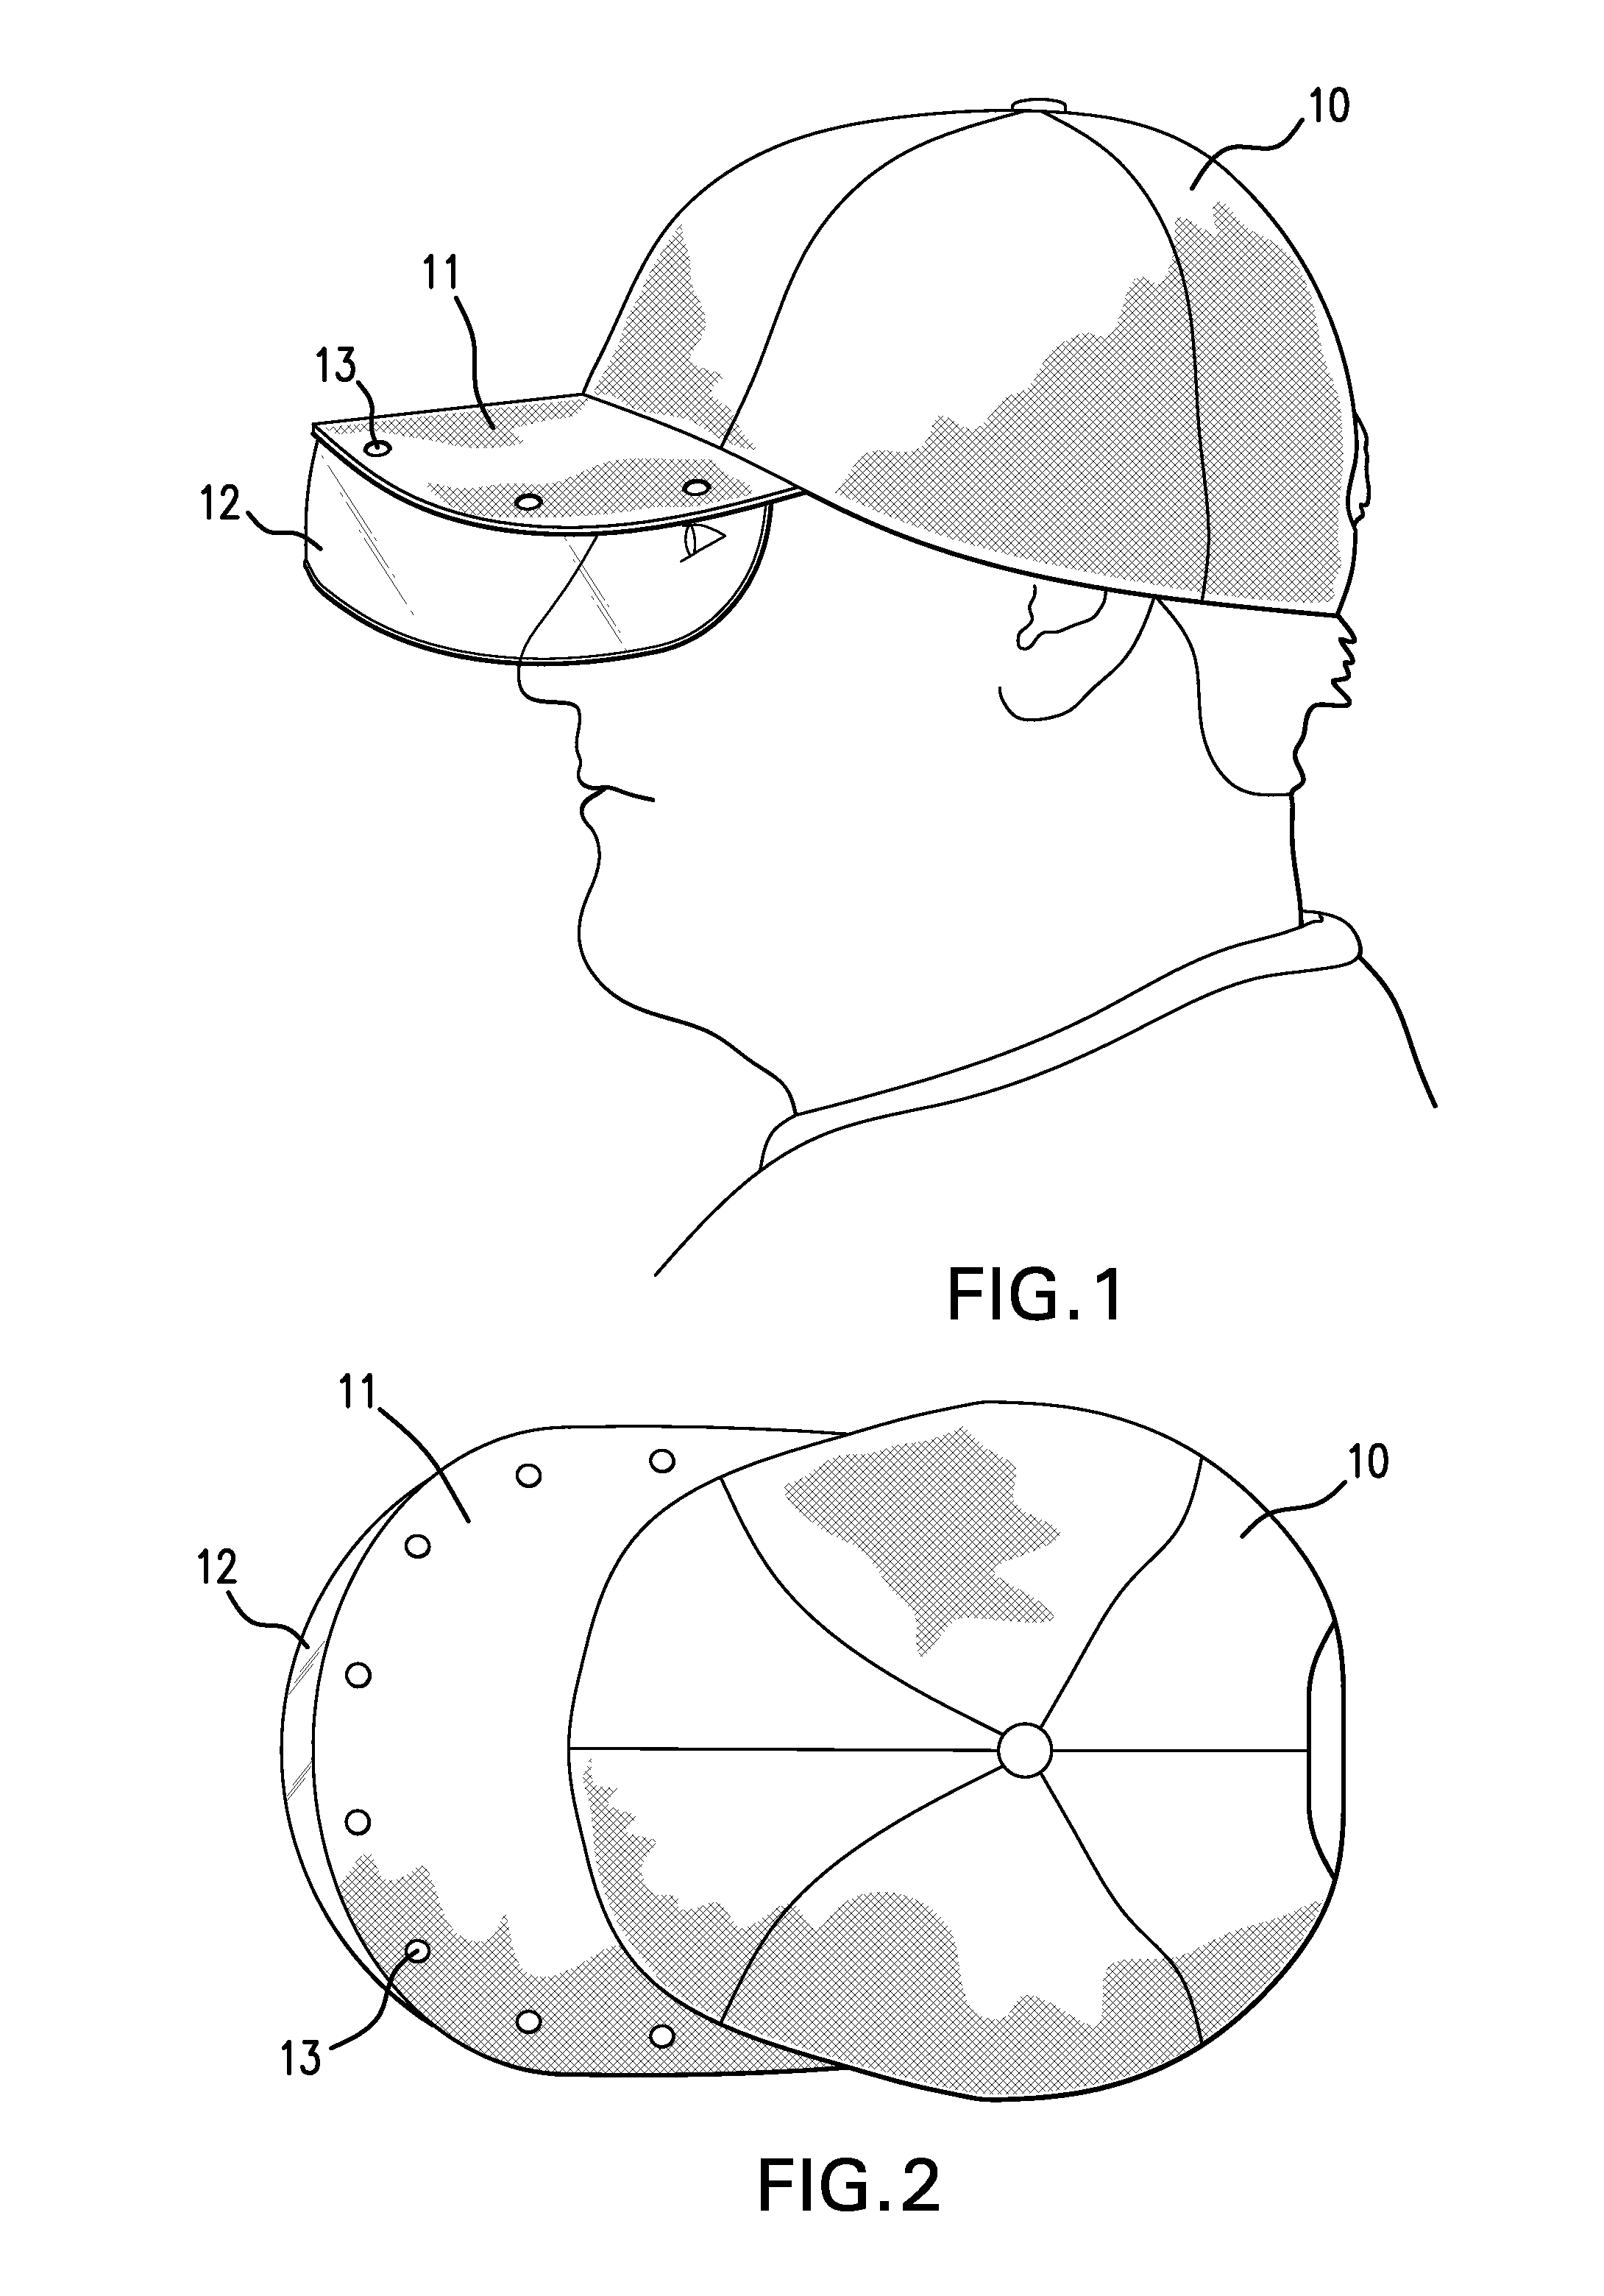 Article of manufacture for a hat and eye shield and process for making same